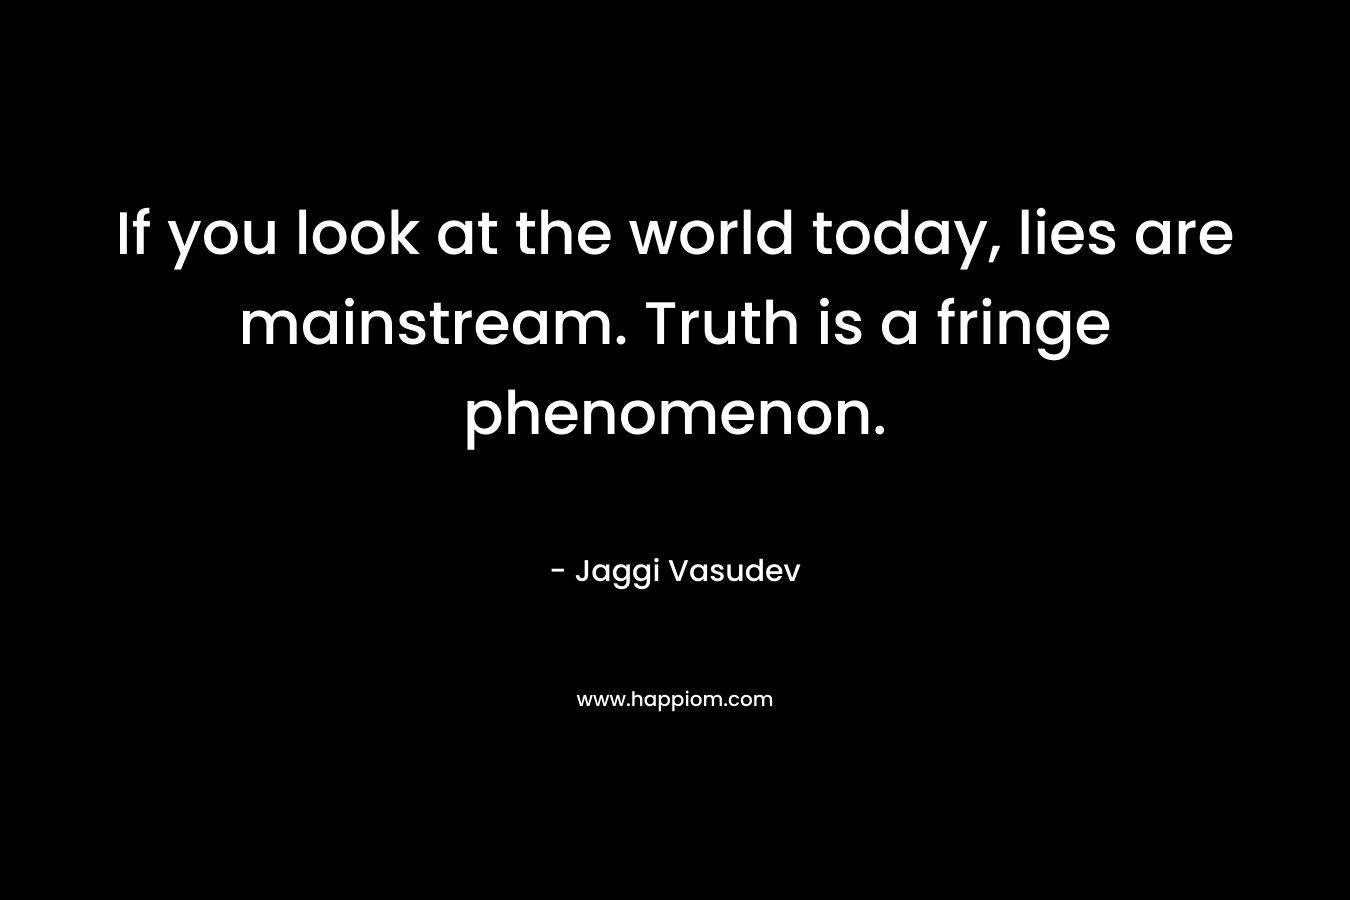 If you look at the world today, lies are mainstream. Truth is a fringe phenomenon. – Jaggi Vasudev